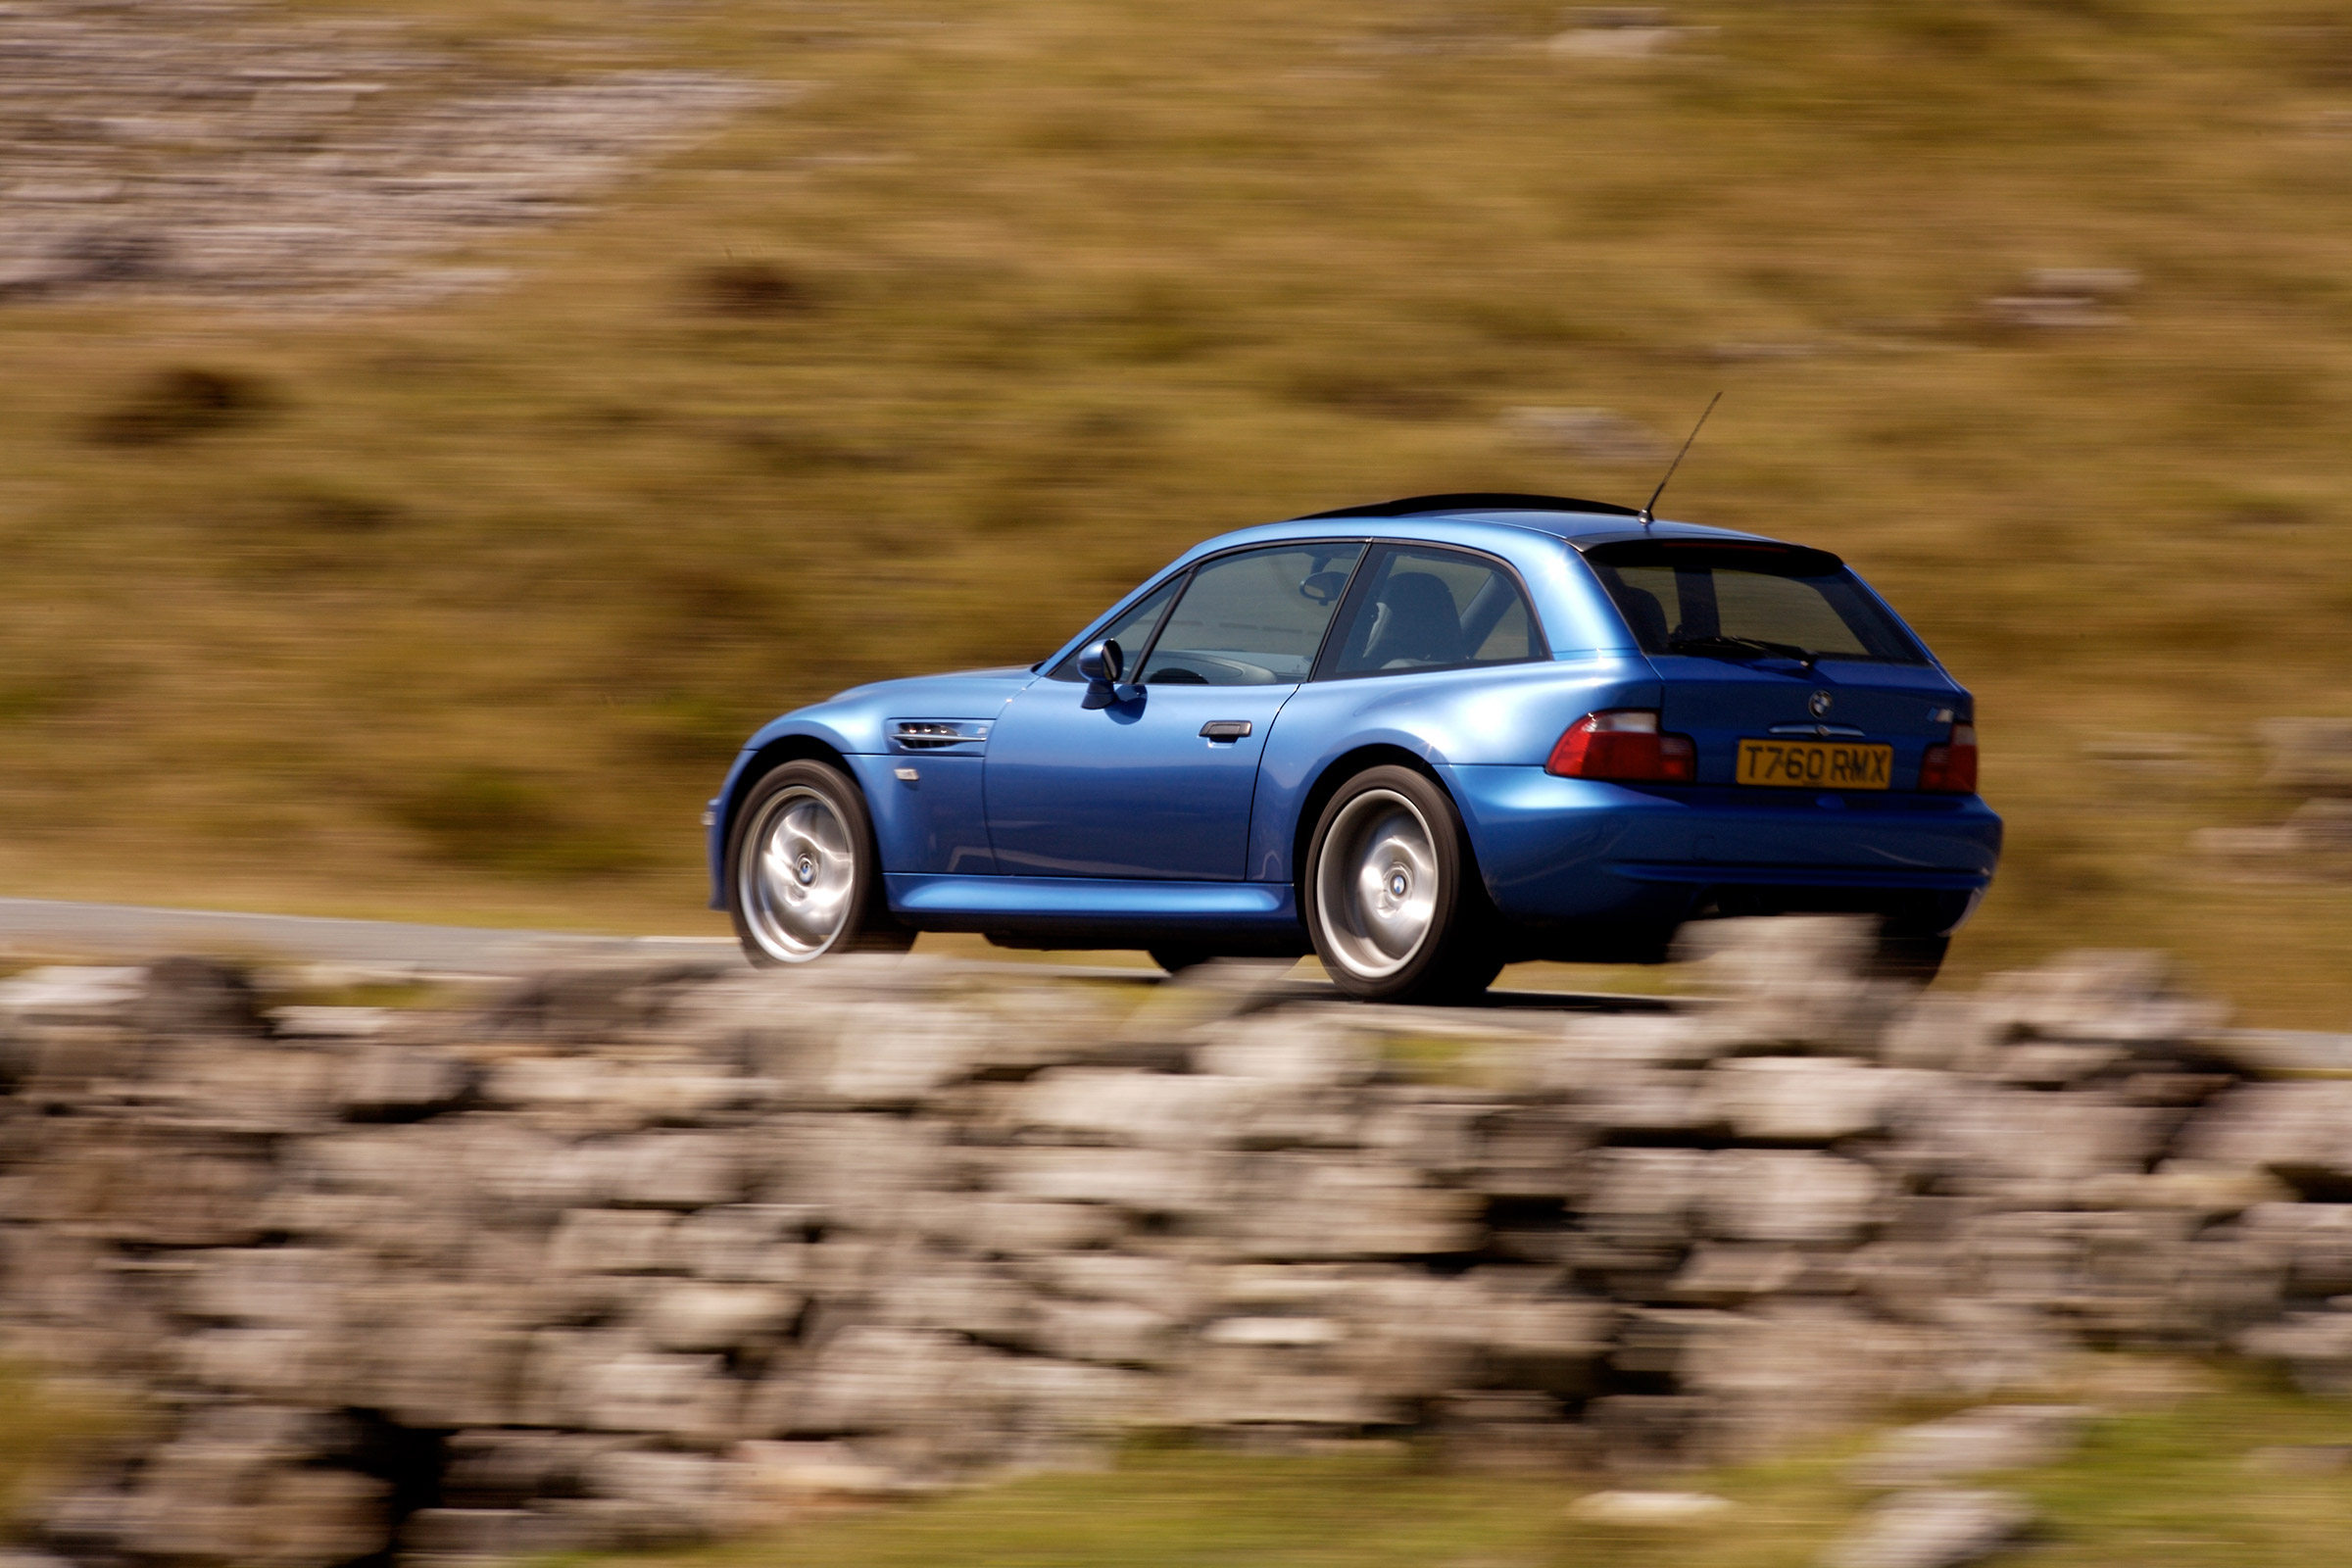 BMW M Coupe (1998-2002) - review, specs and buying guide | evo